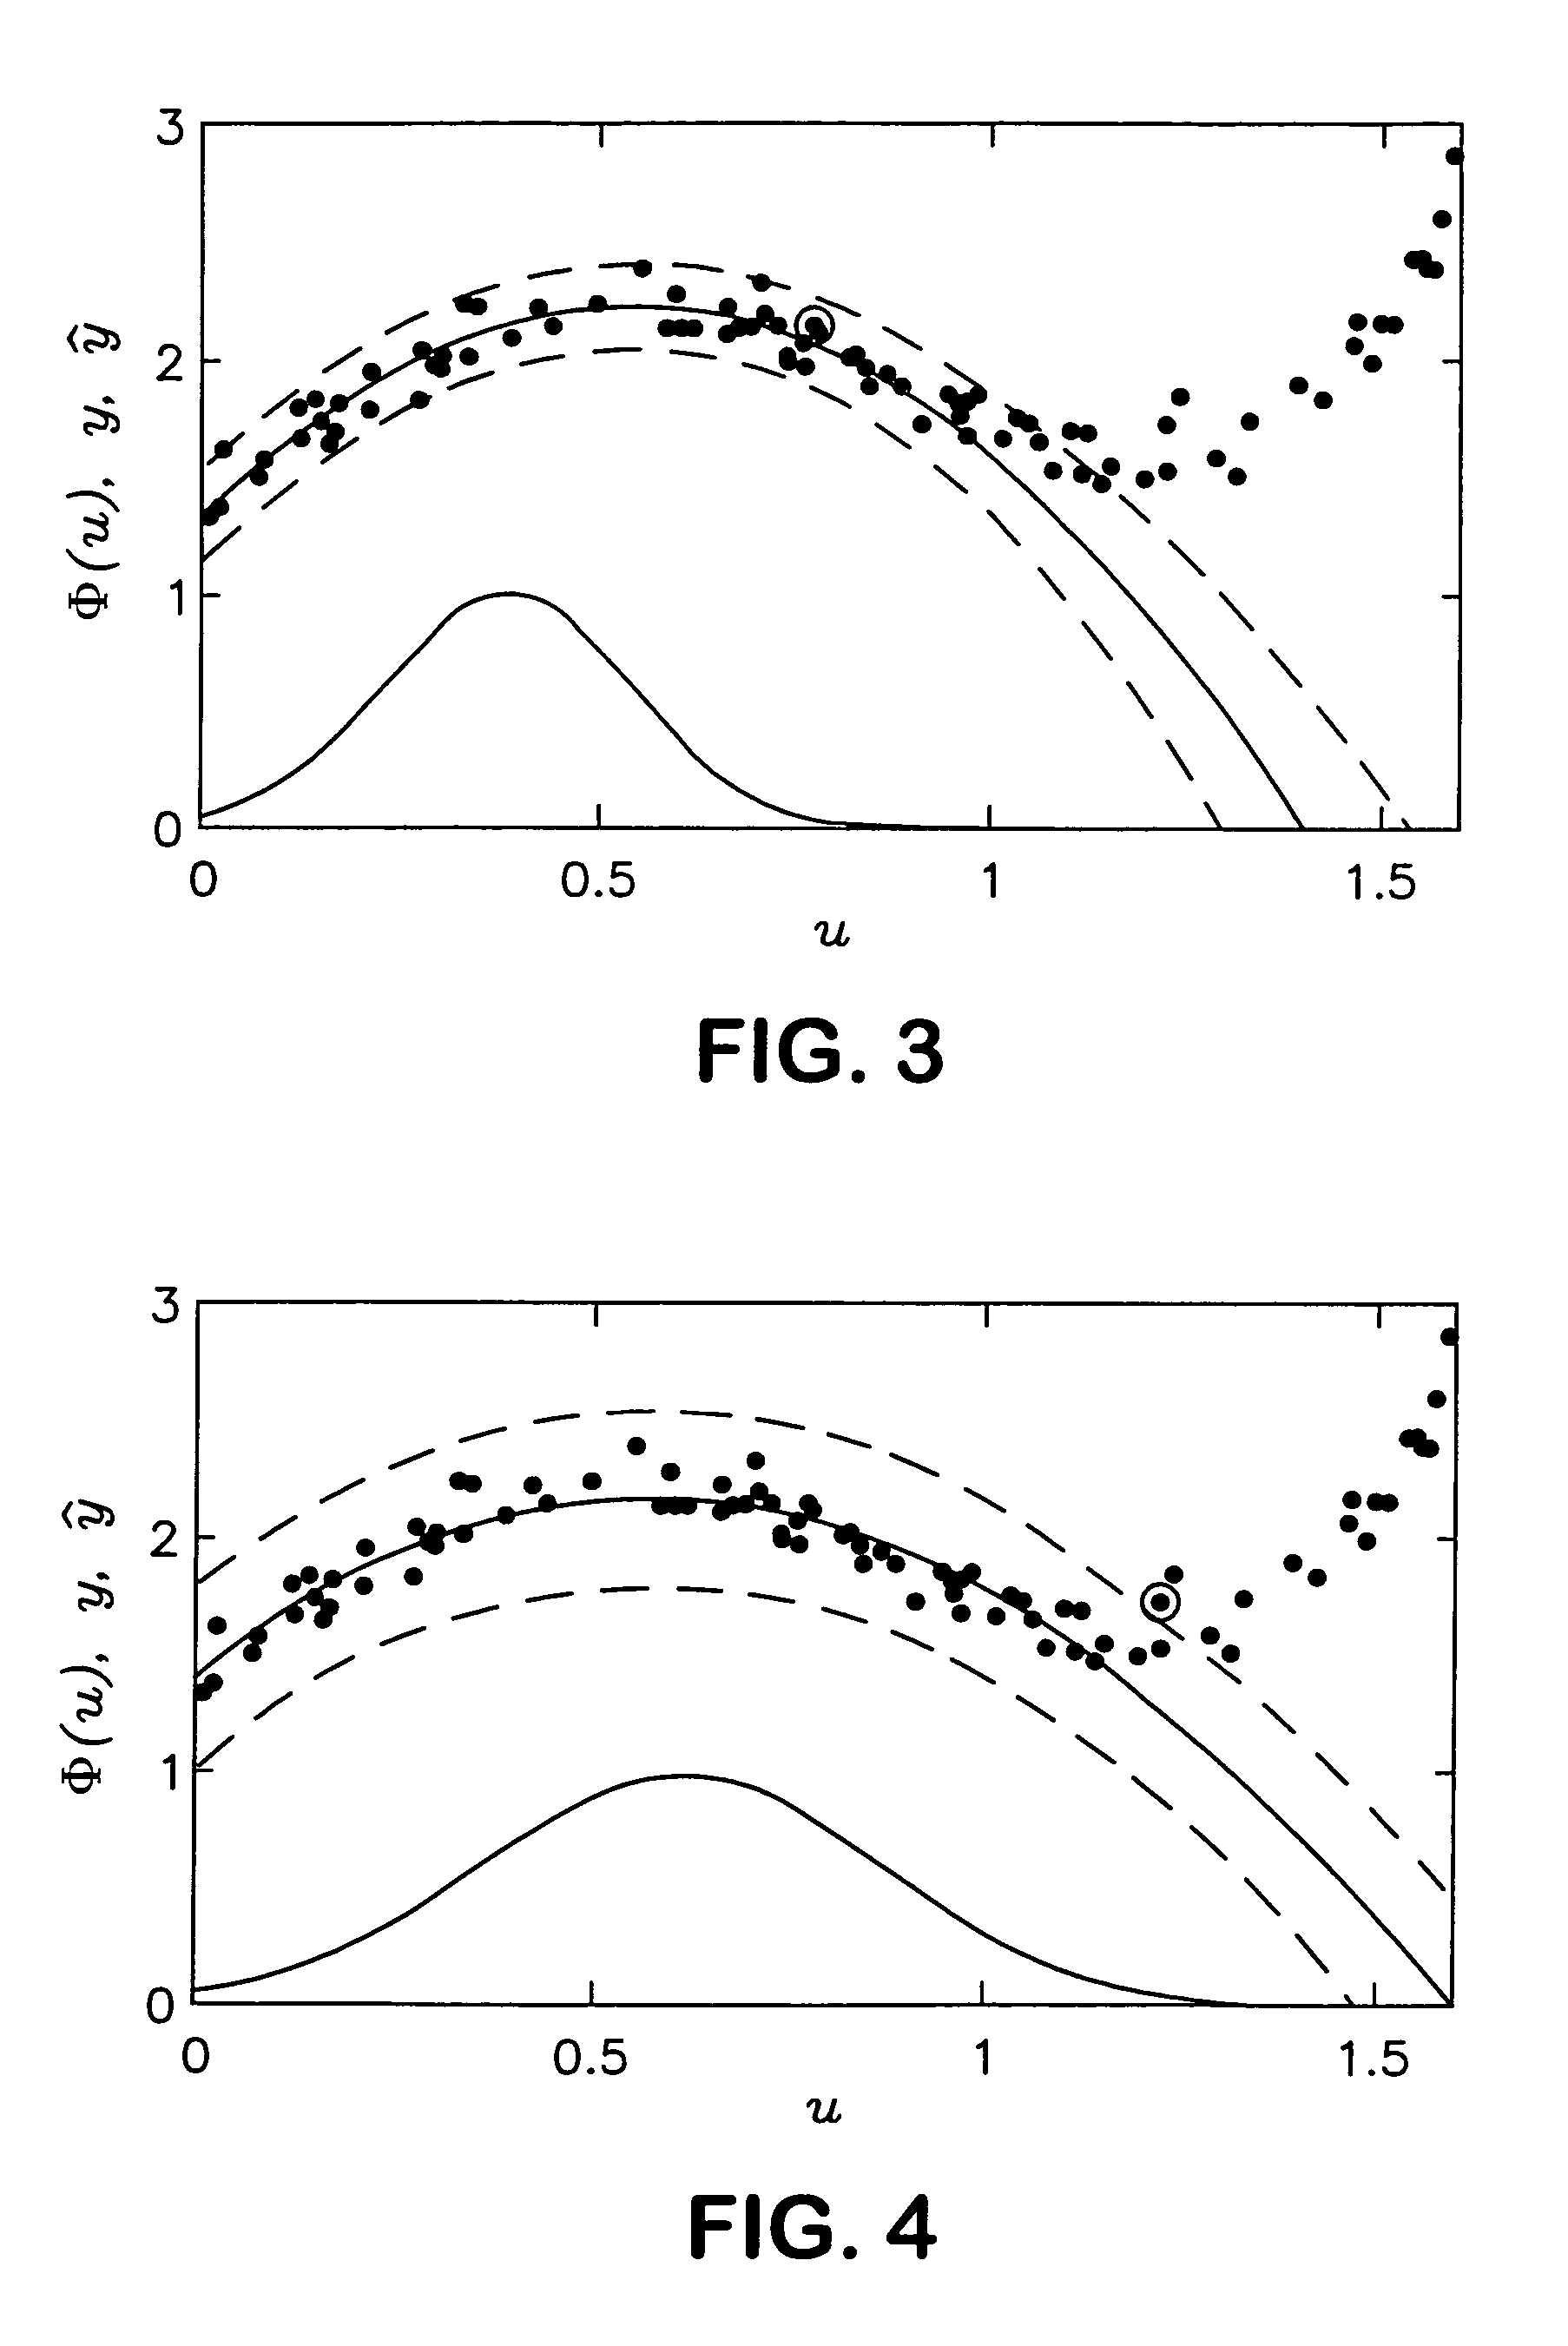 Method for creating a non-linear, stationary or dynamic model of a control variable of a machine